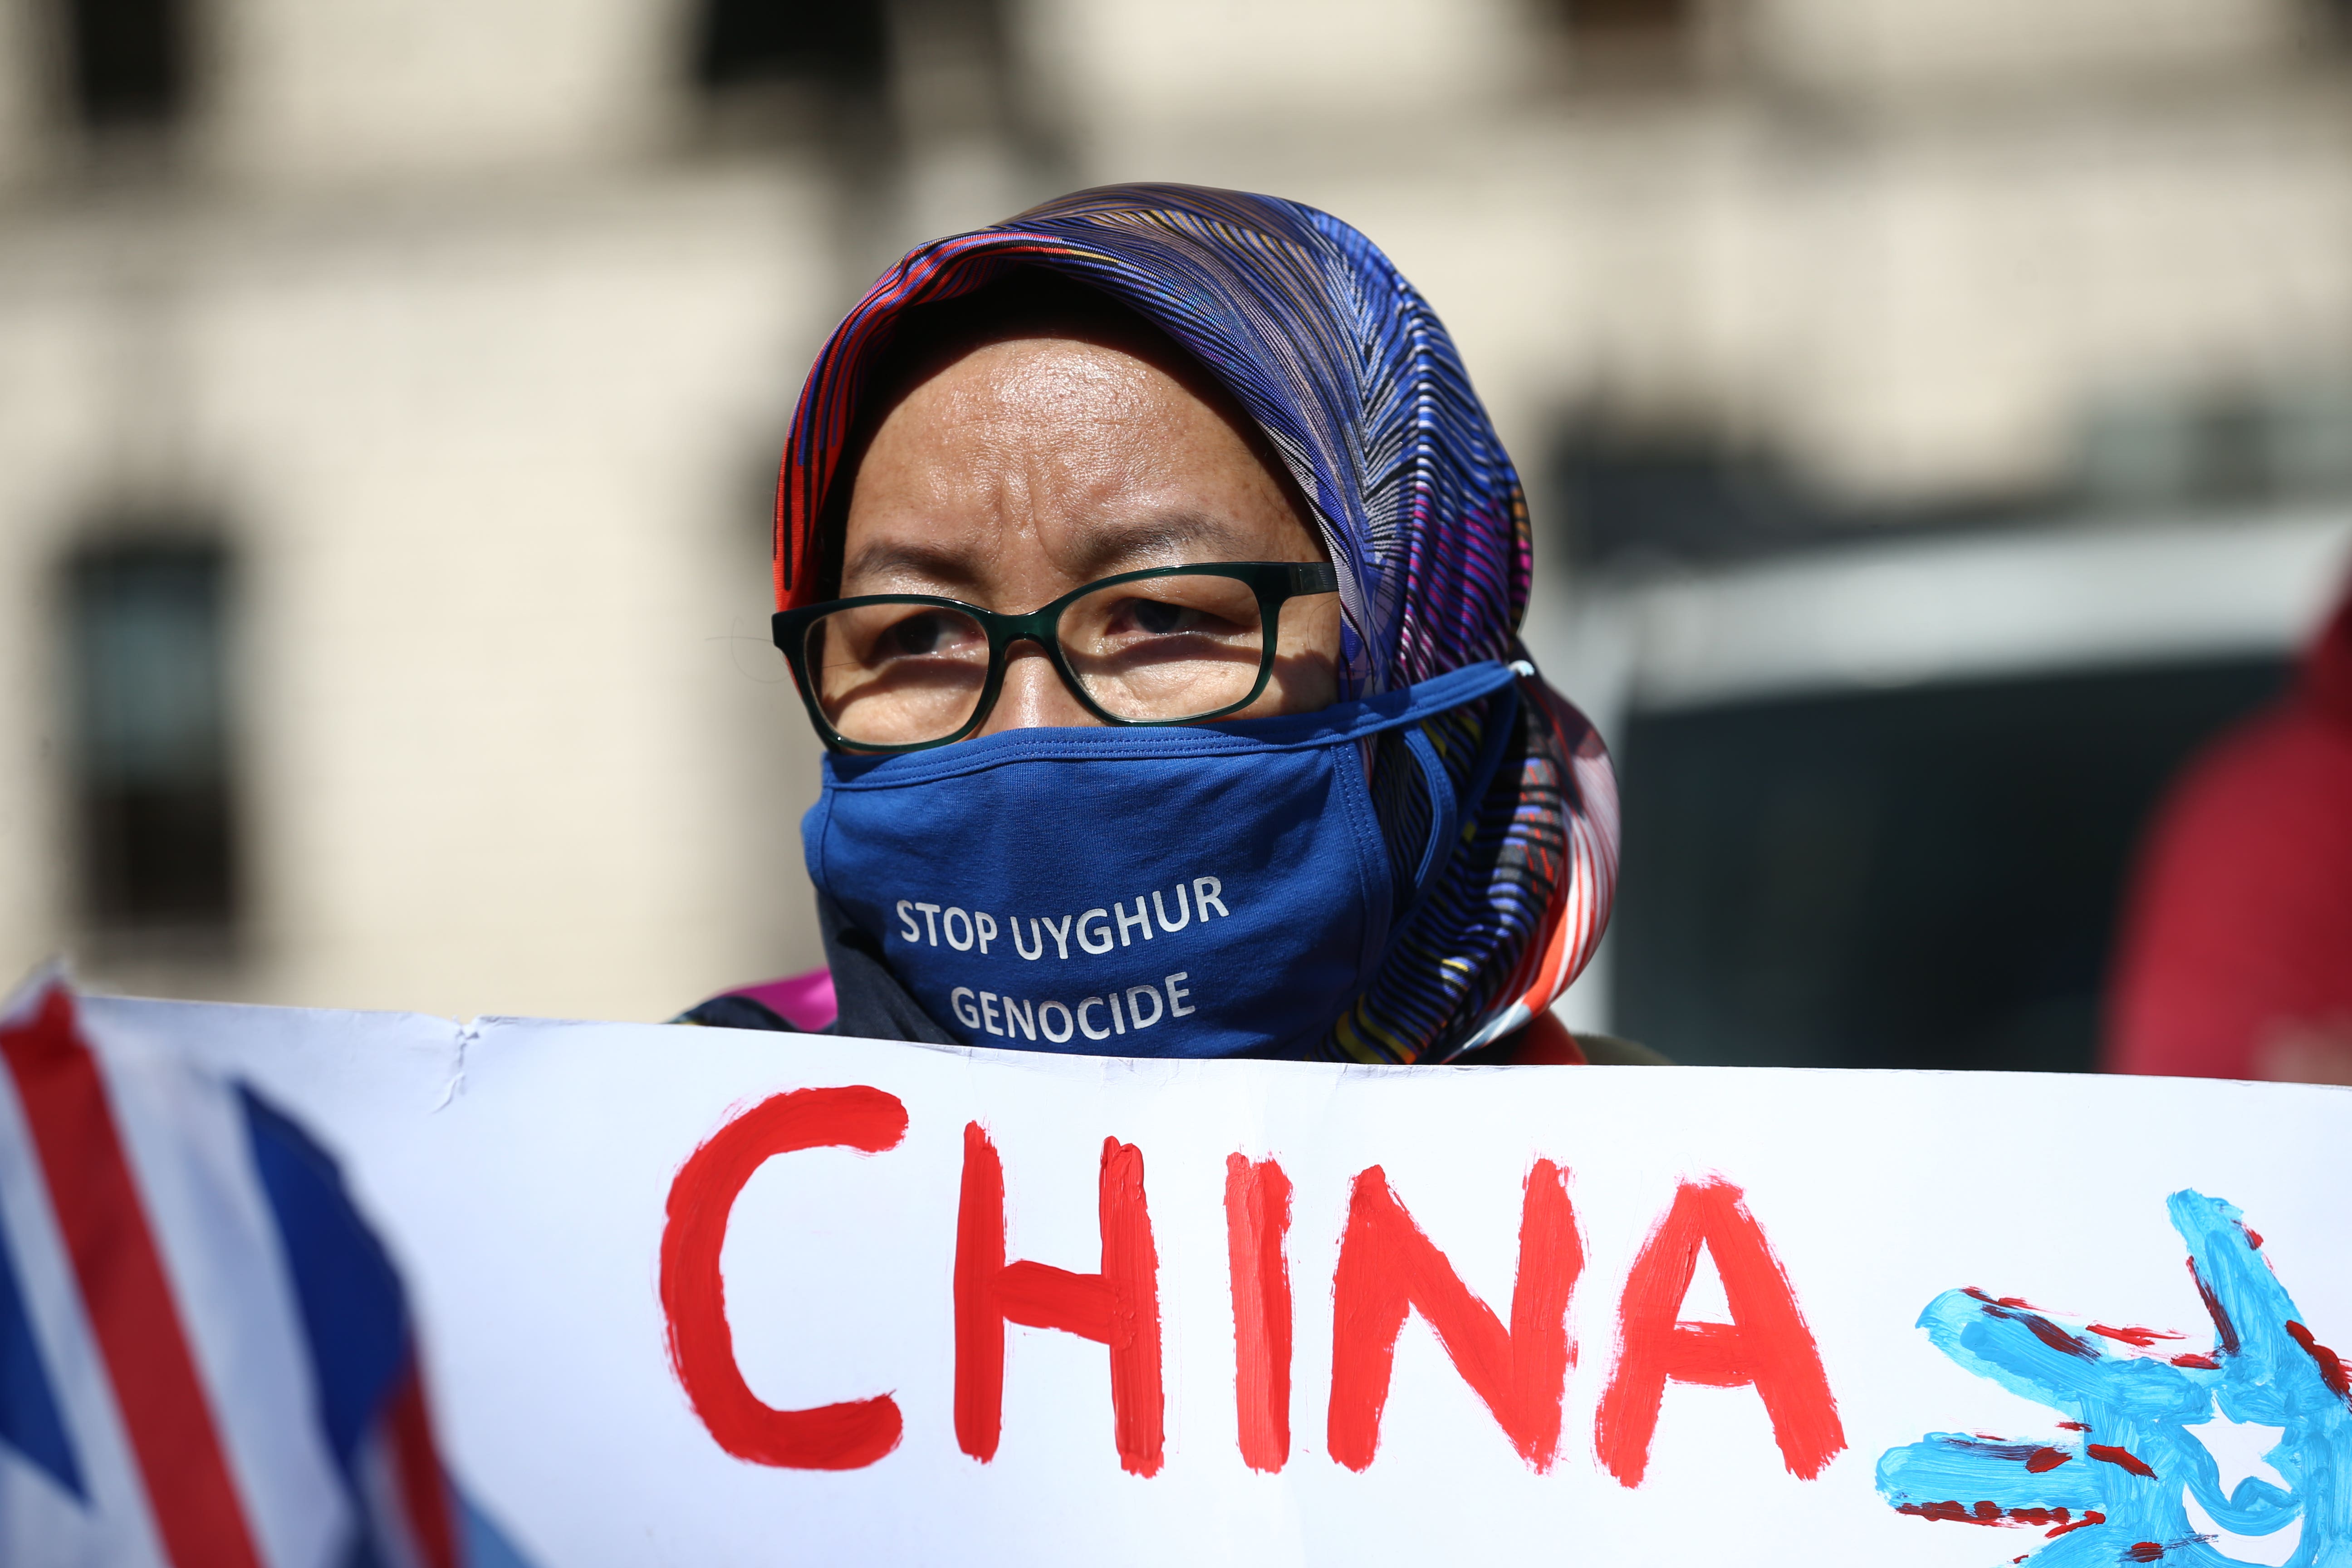 A Uighur woman during a demonstration in Parliament Square, London